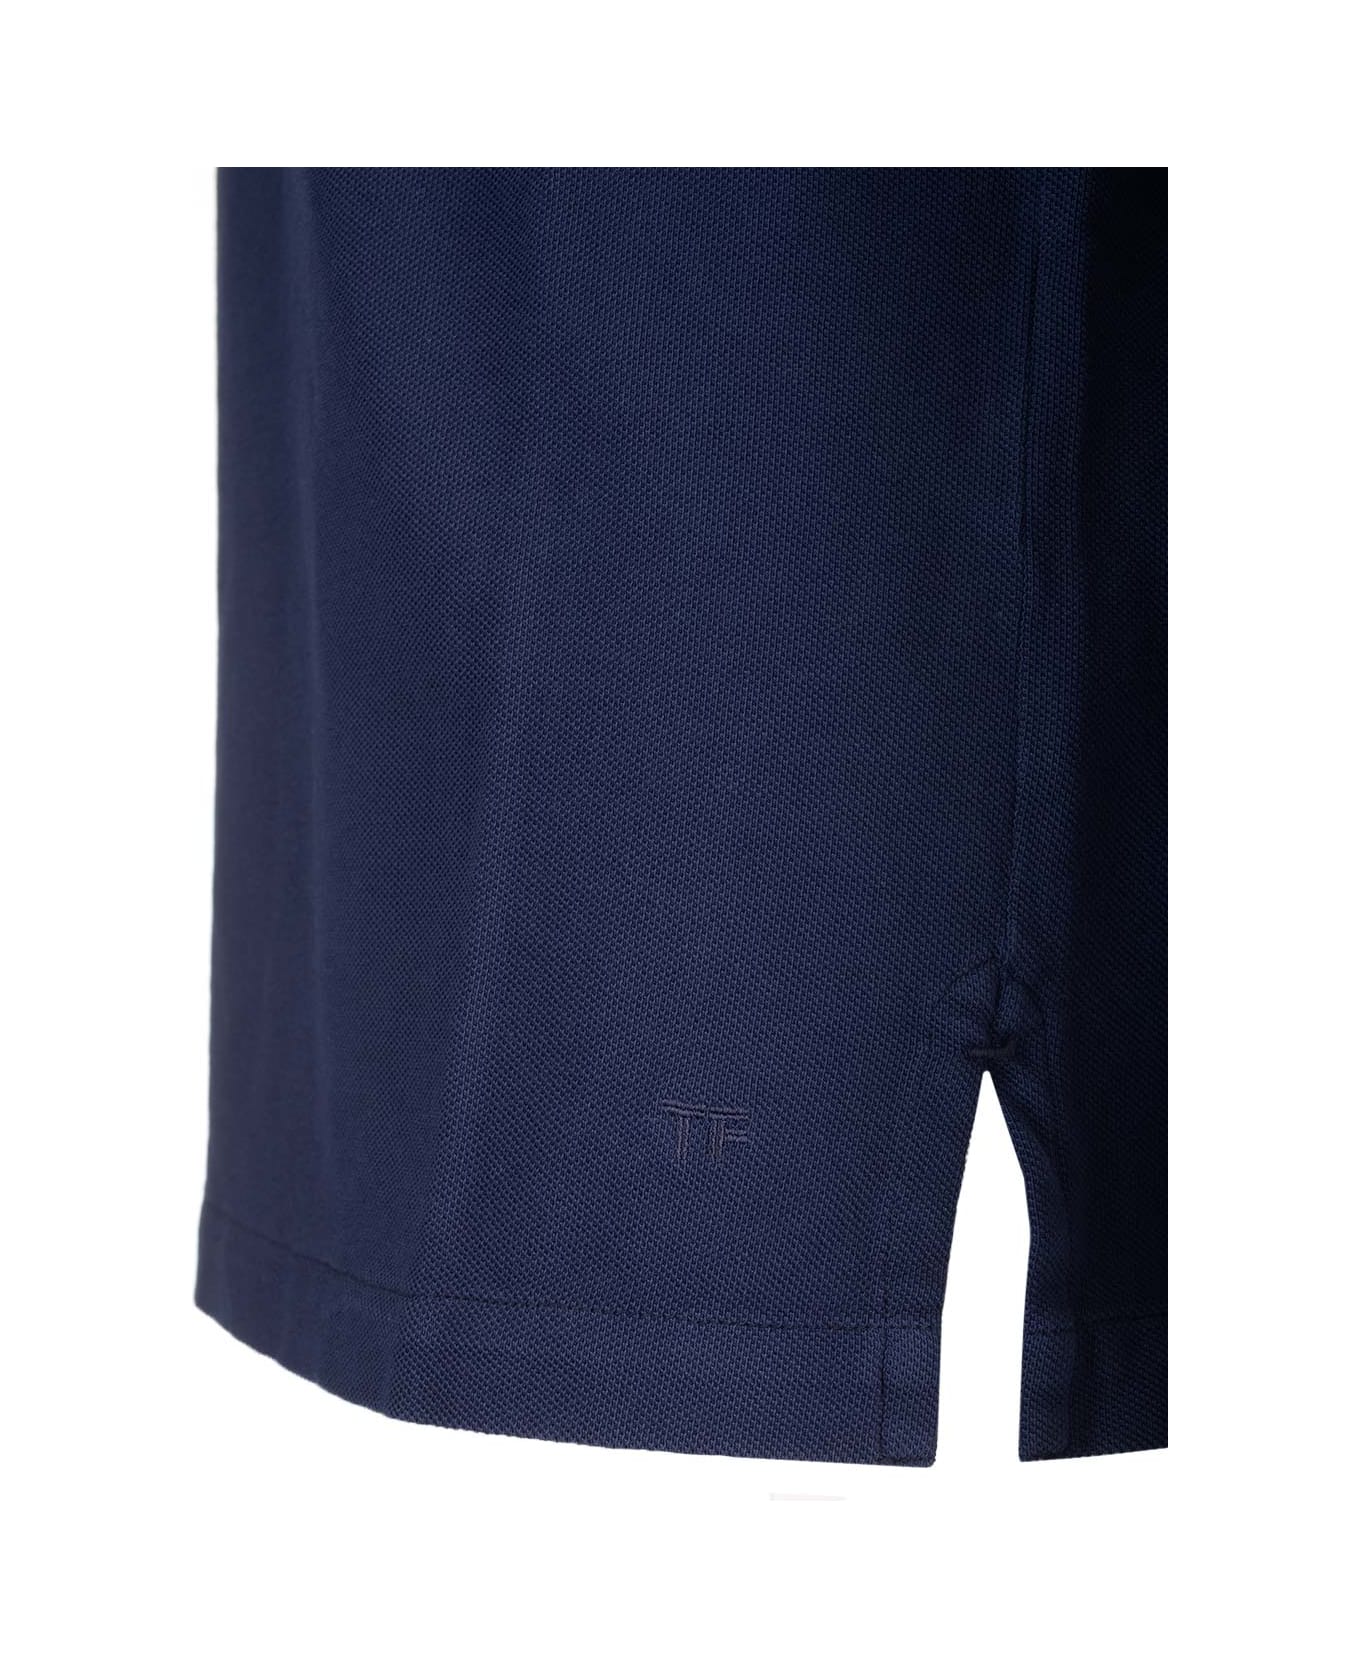 Tom Ford Navy Blue Cotton Polo Shirt - INK